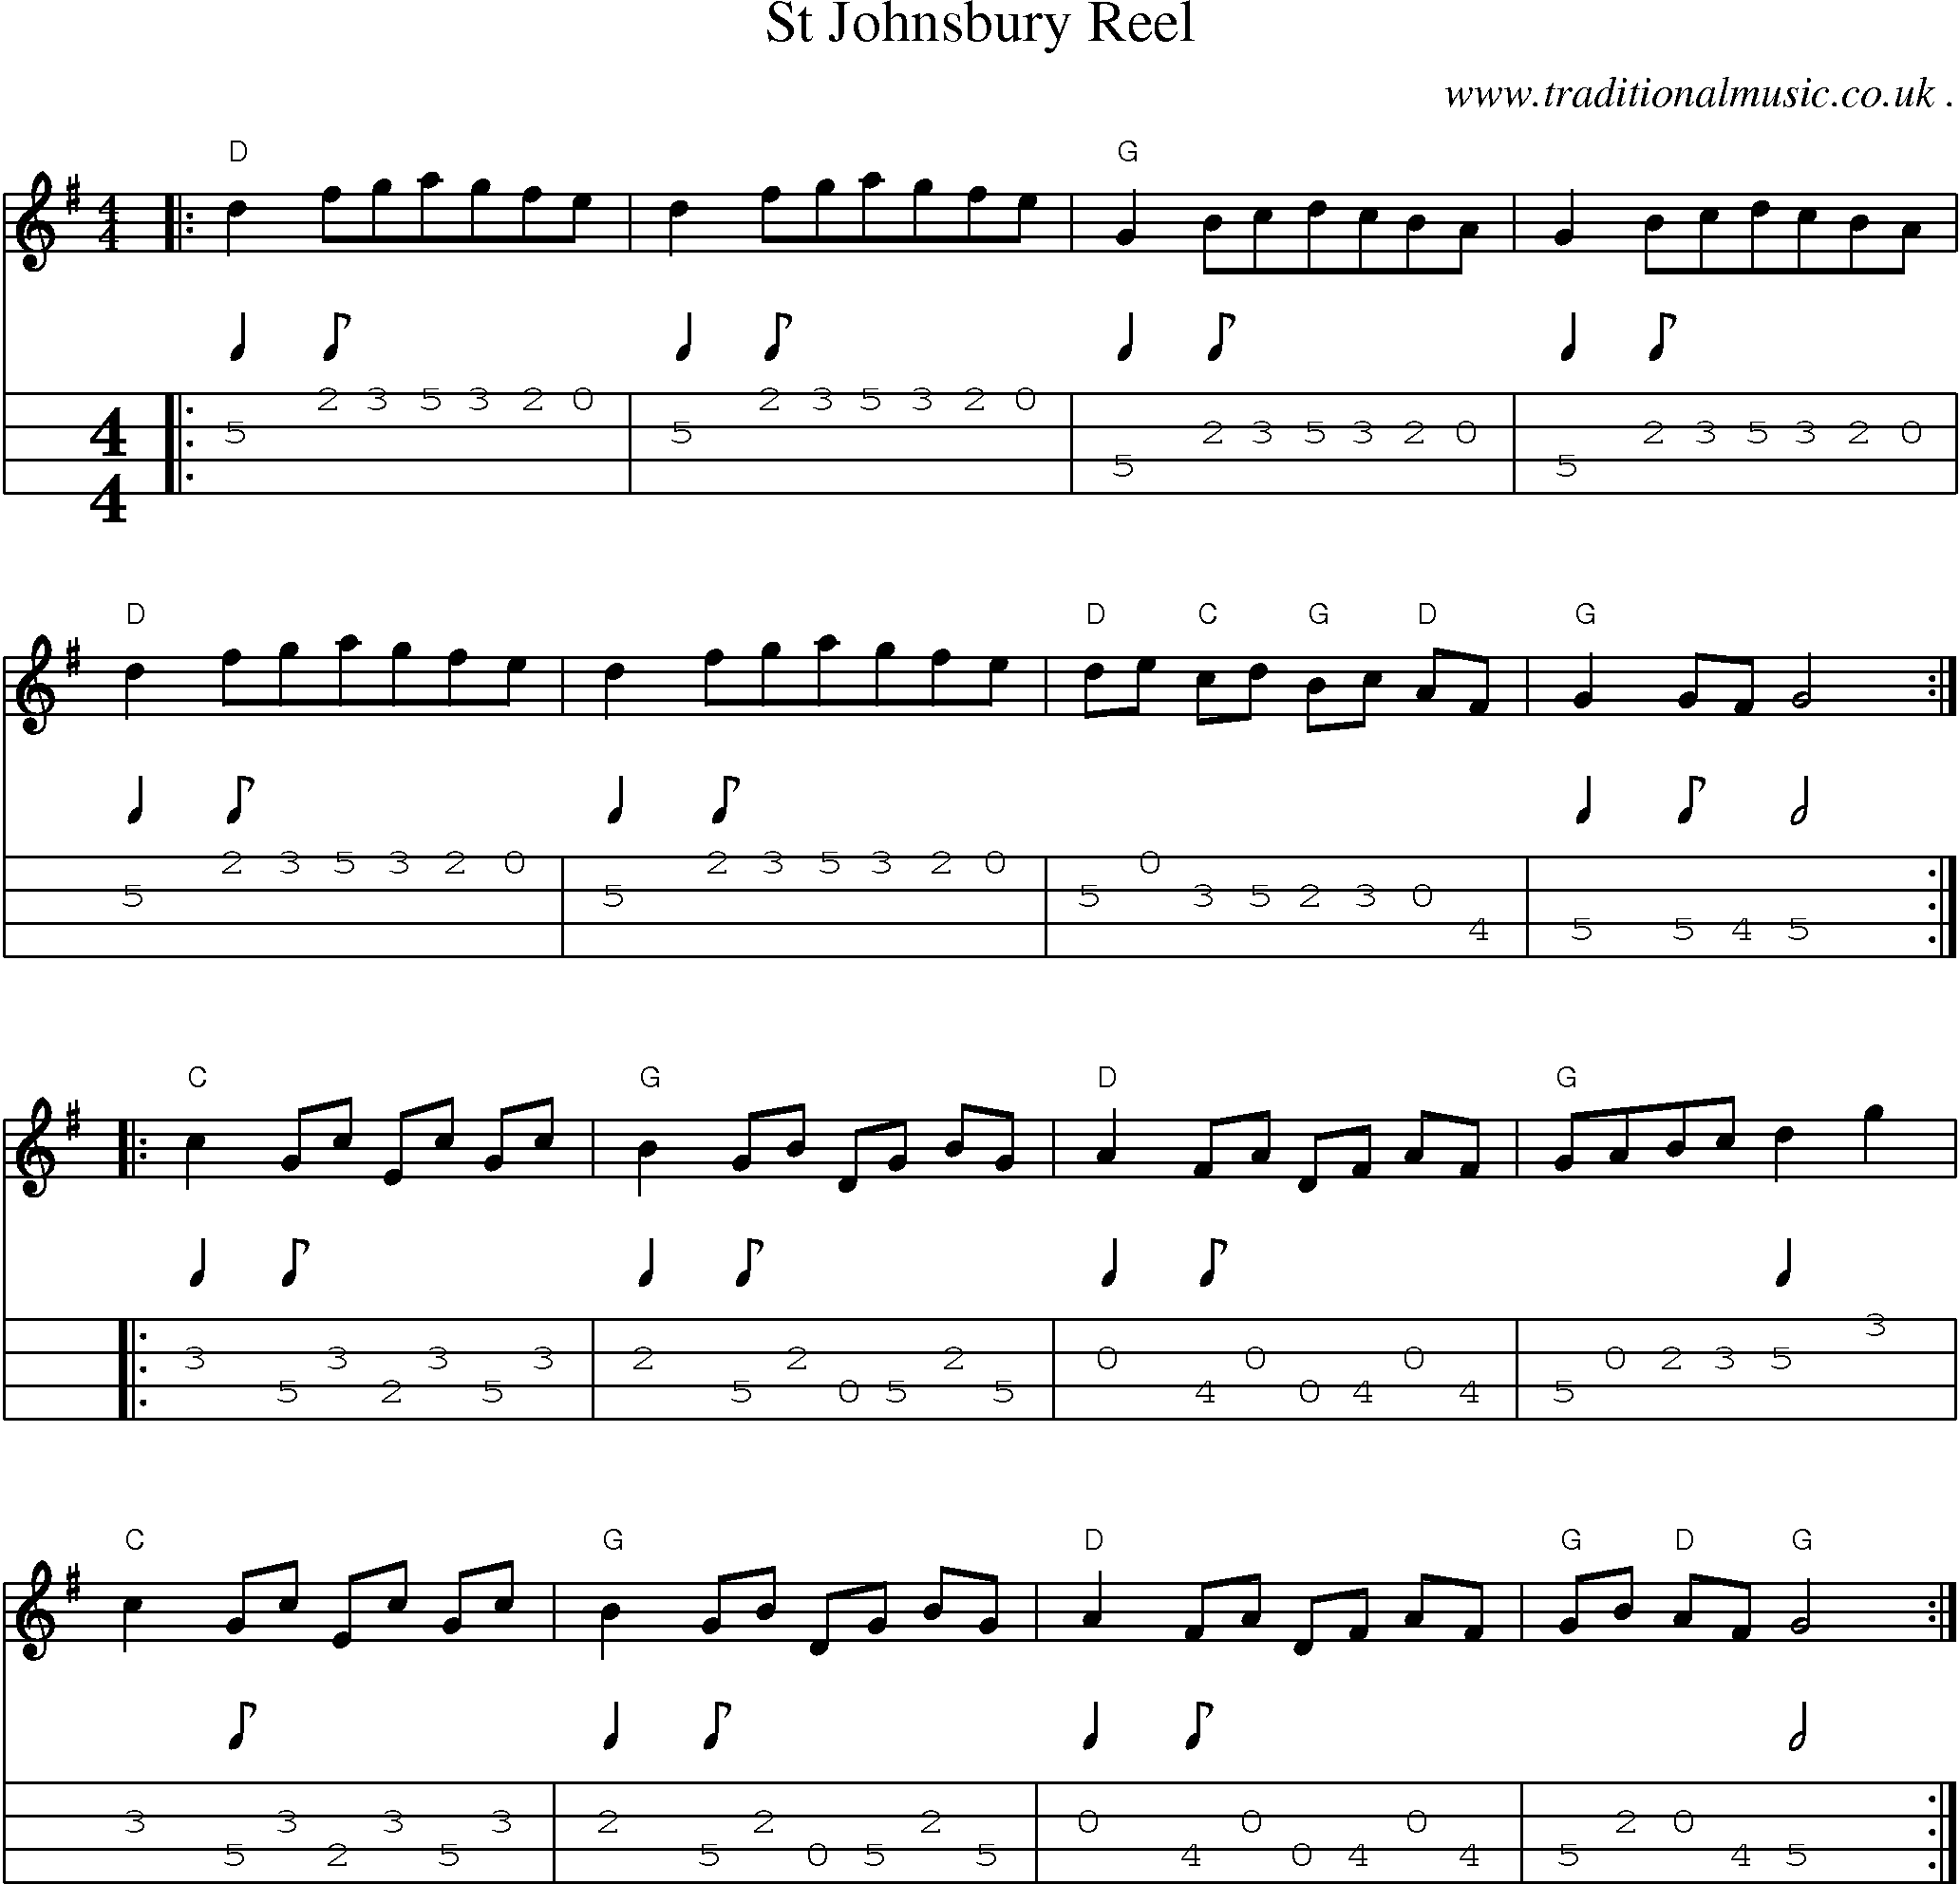 Music Score and Mandolin Tabs for St Johnsbury Reel